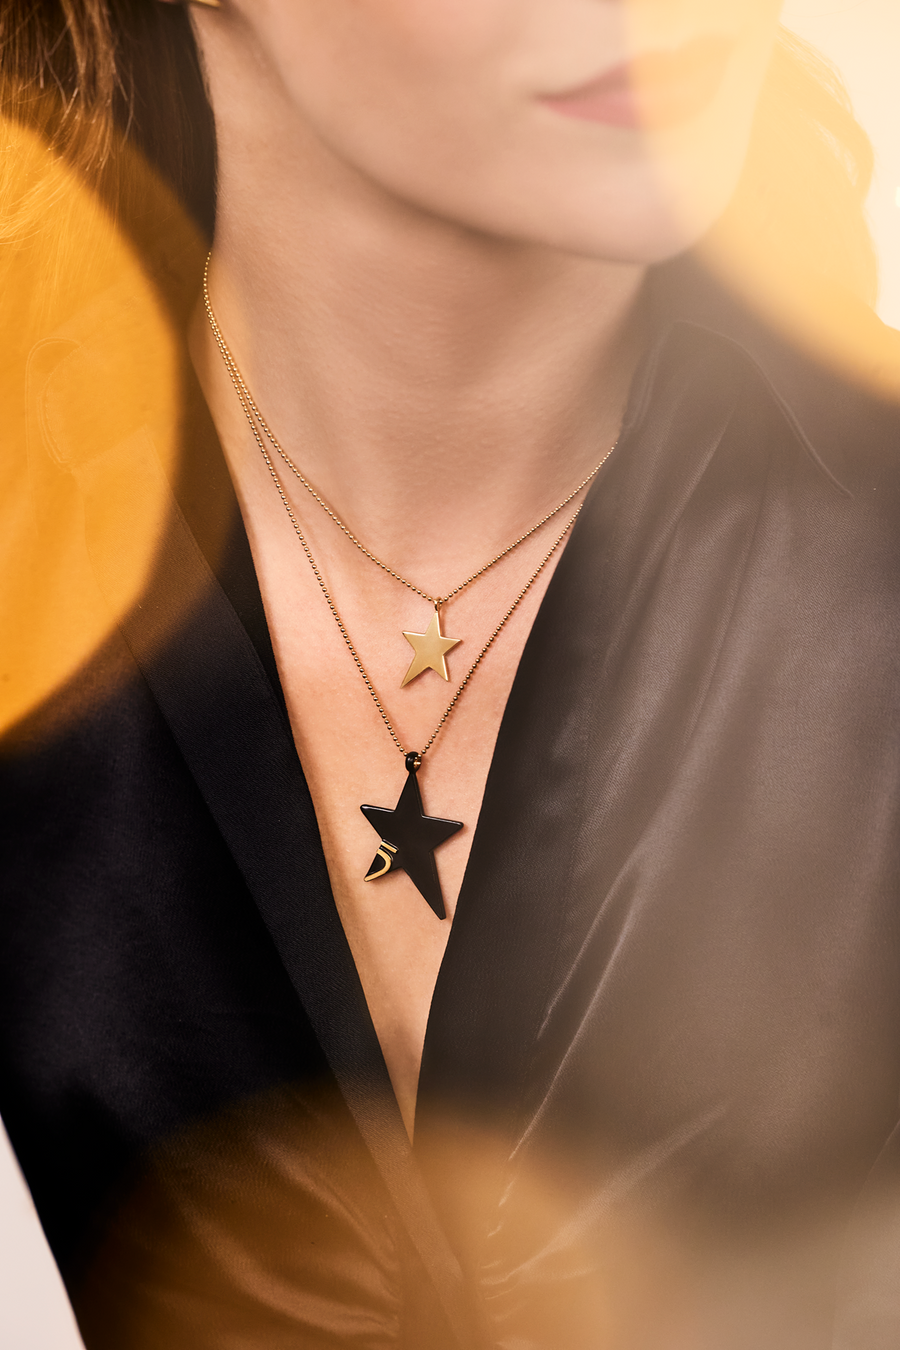 The Everlucky Lucky Stars Medium Black 18K Gold Plated Silver 925° Necklace